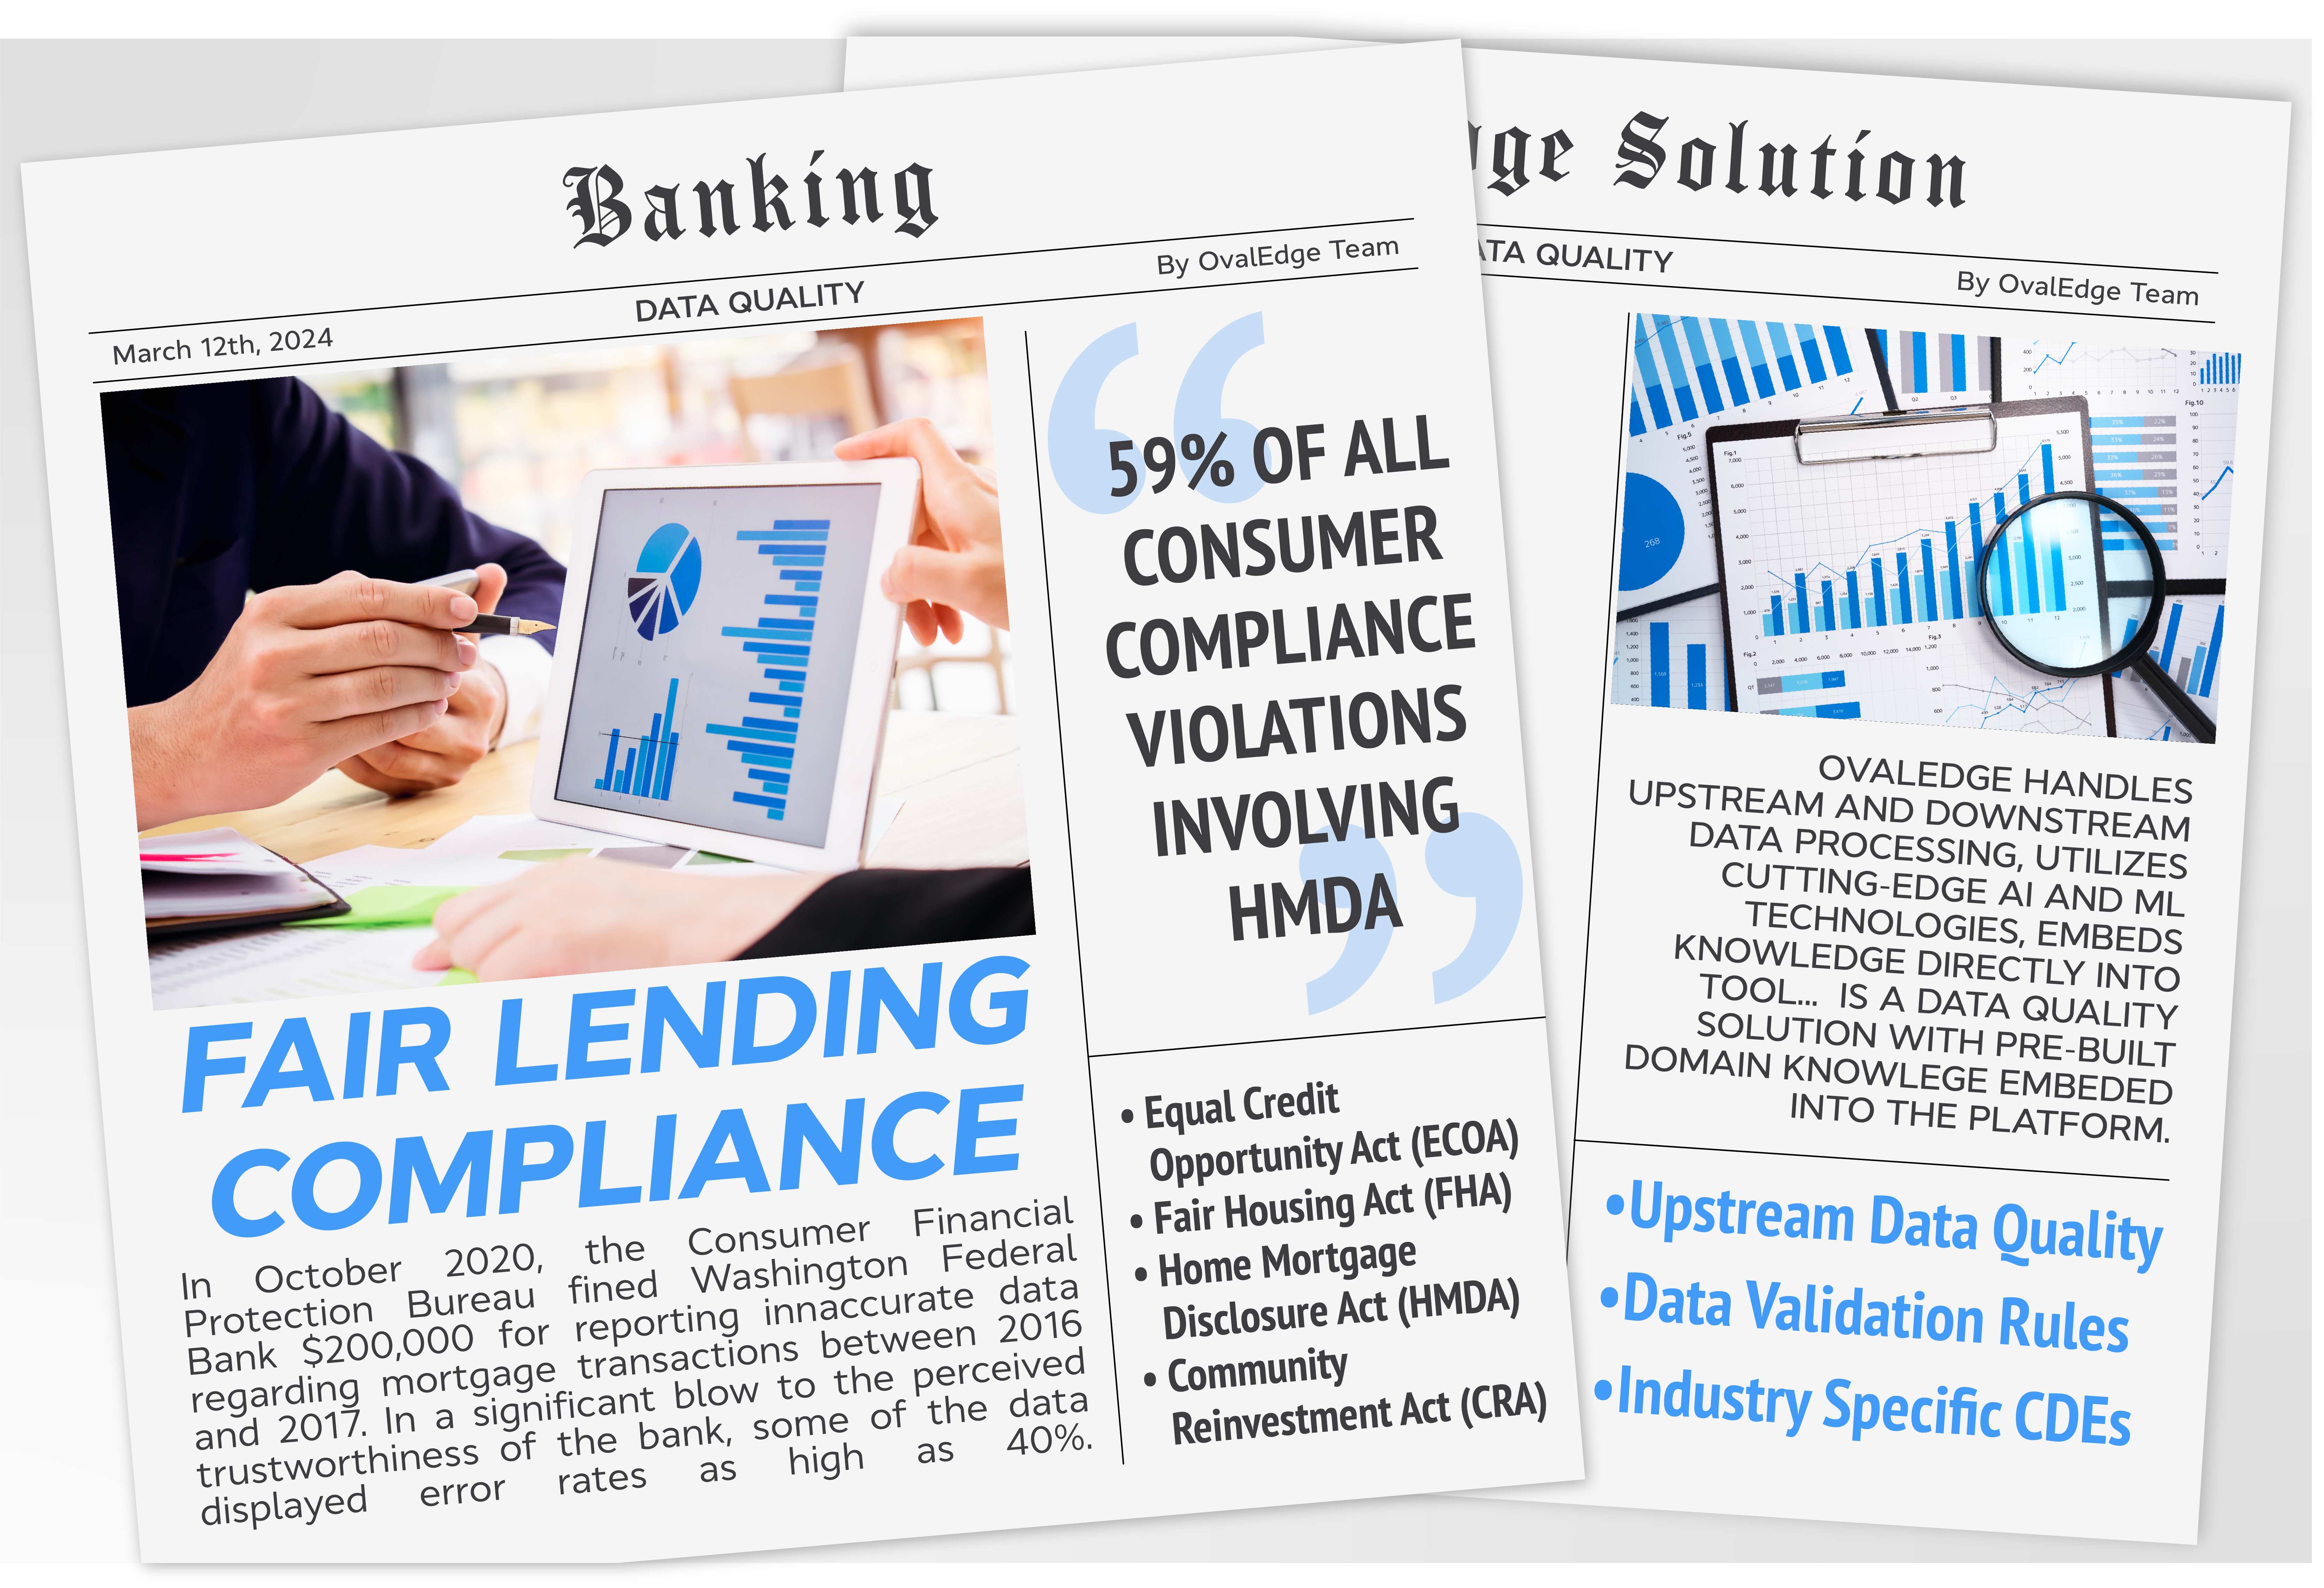 Data Quality Challenges for Fair Lending Compliance in Banking